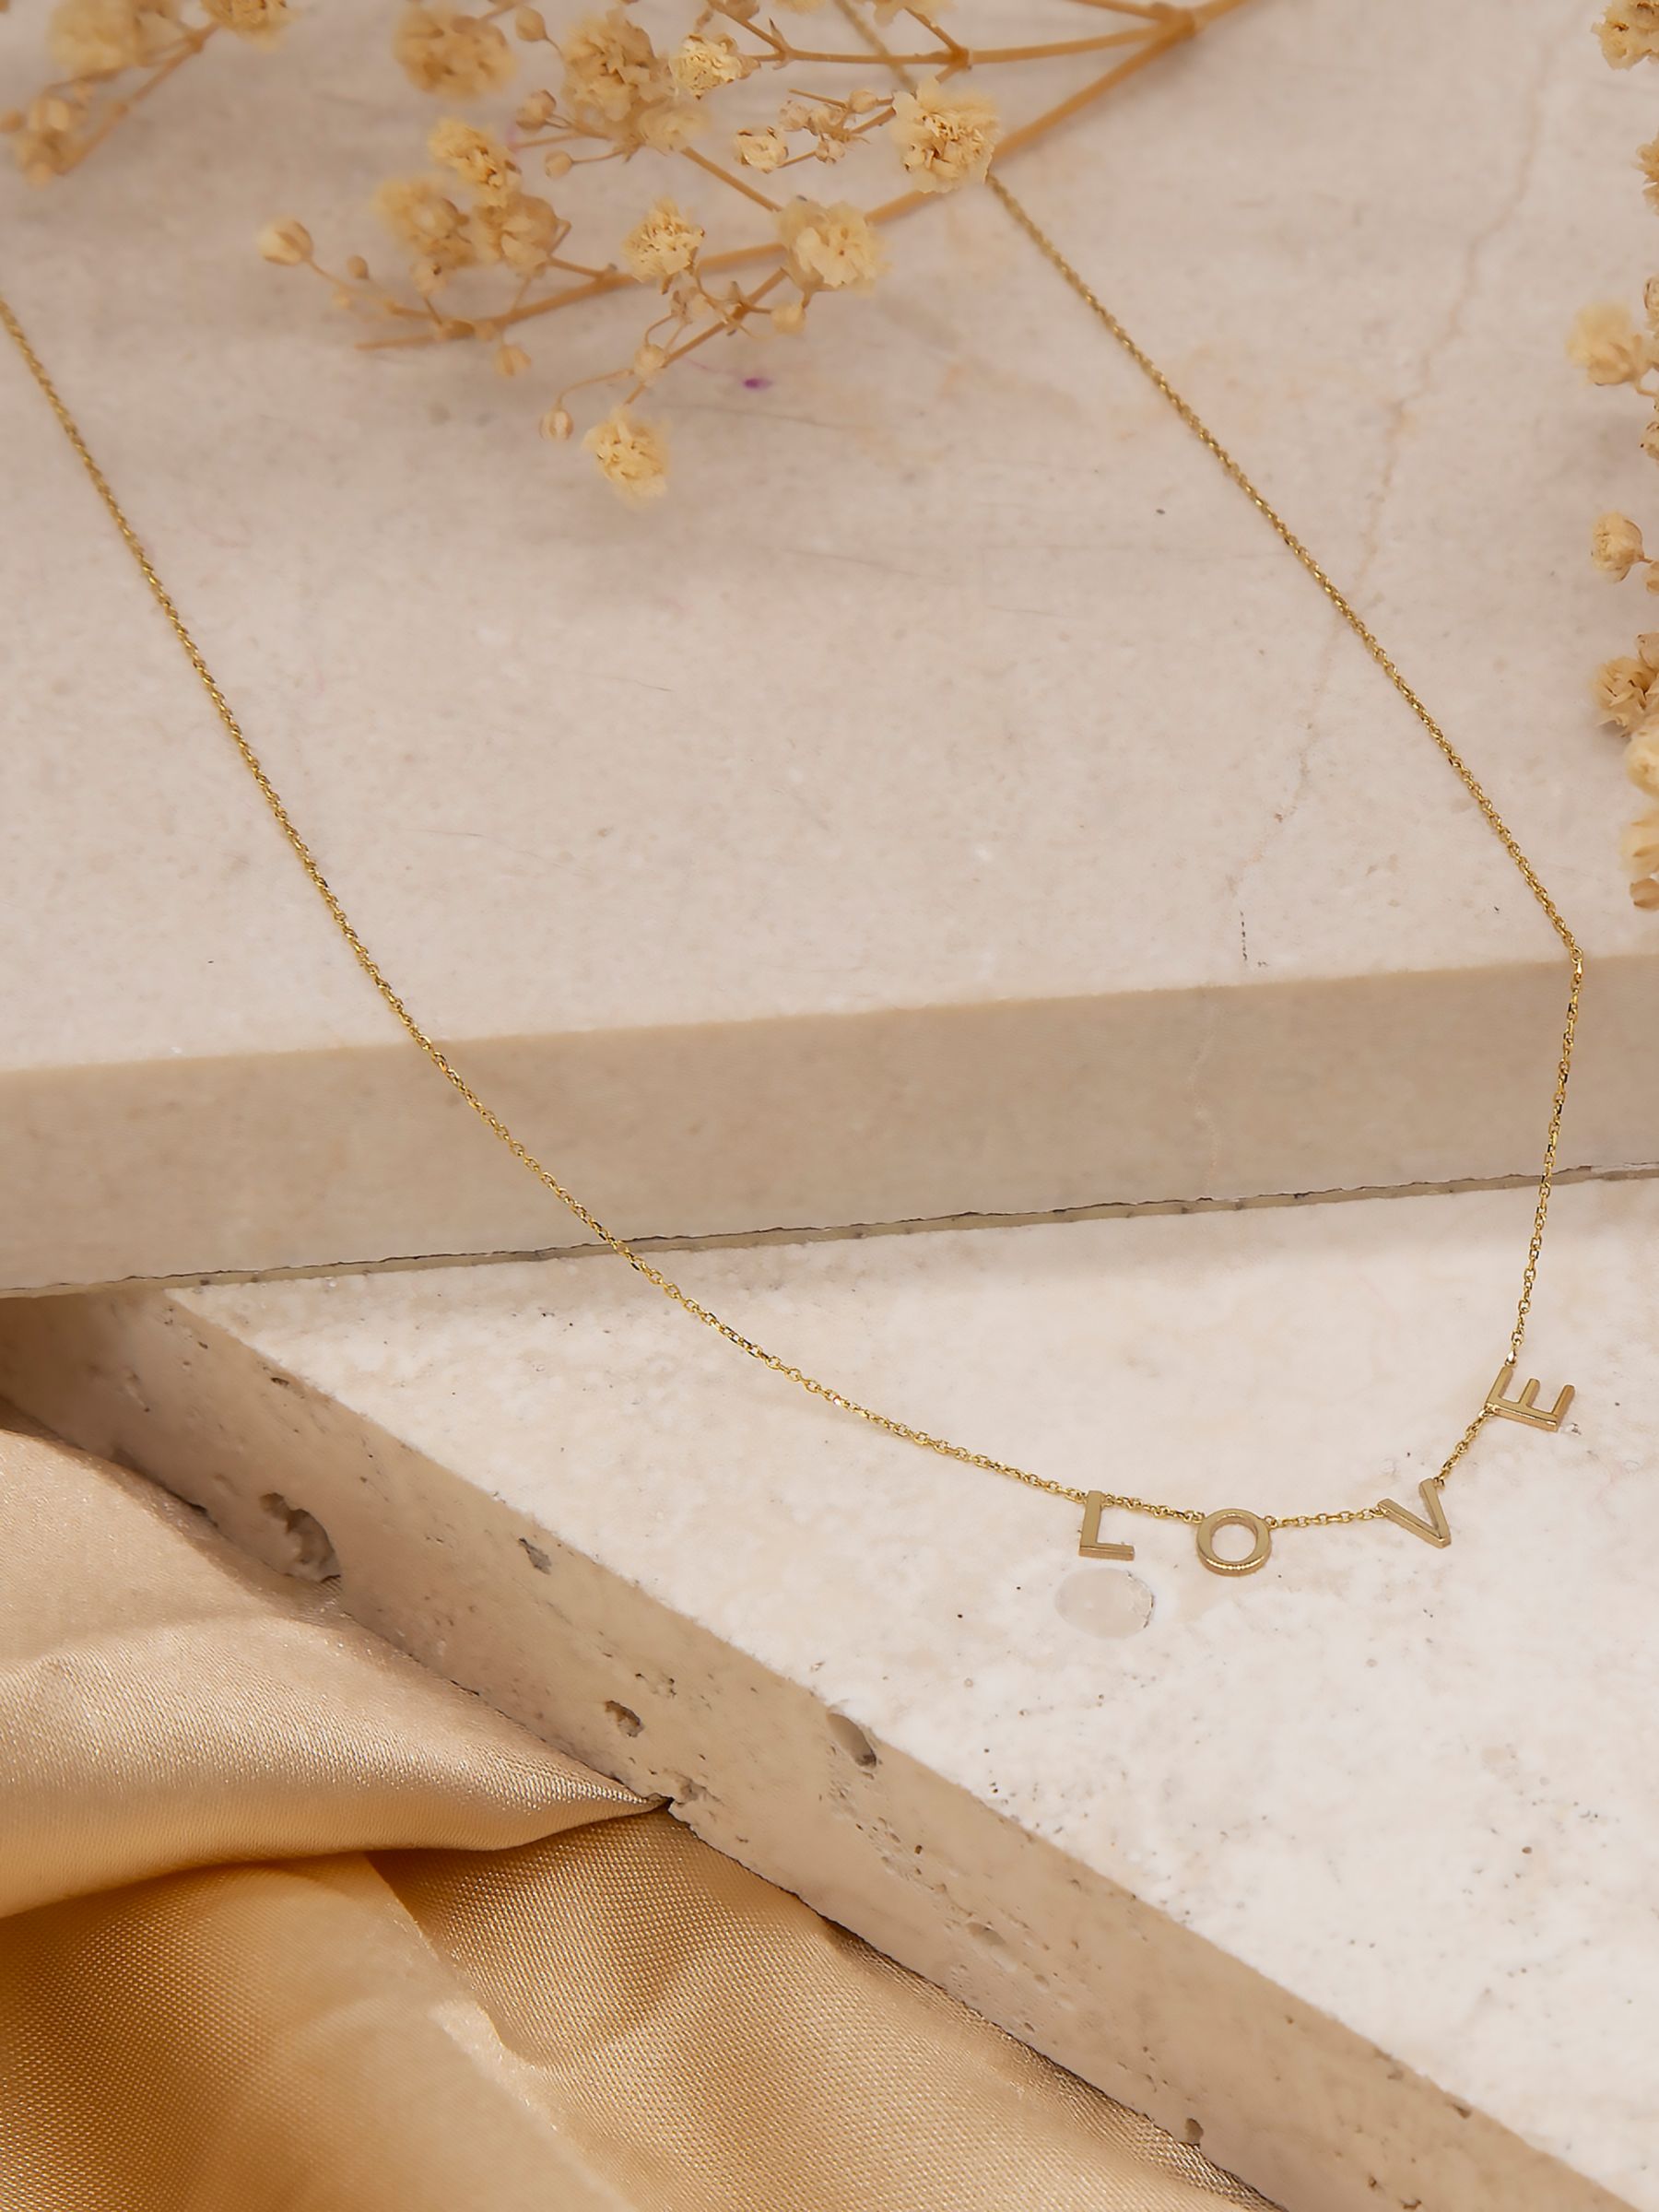 Buy IBB 9ct Yellow Gold Love Necklace, Gold Online at johnlewis.com